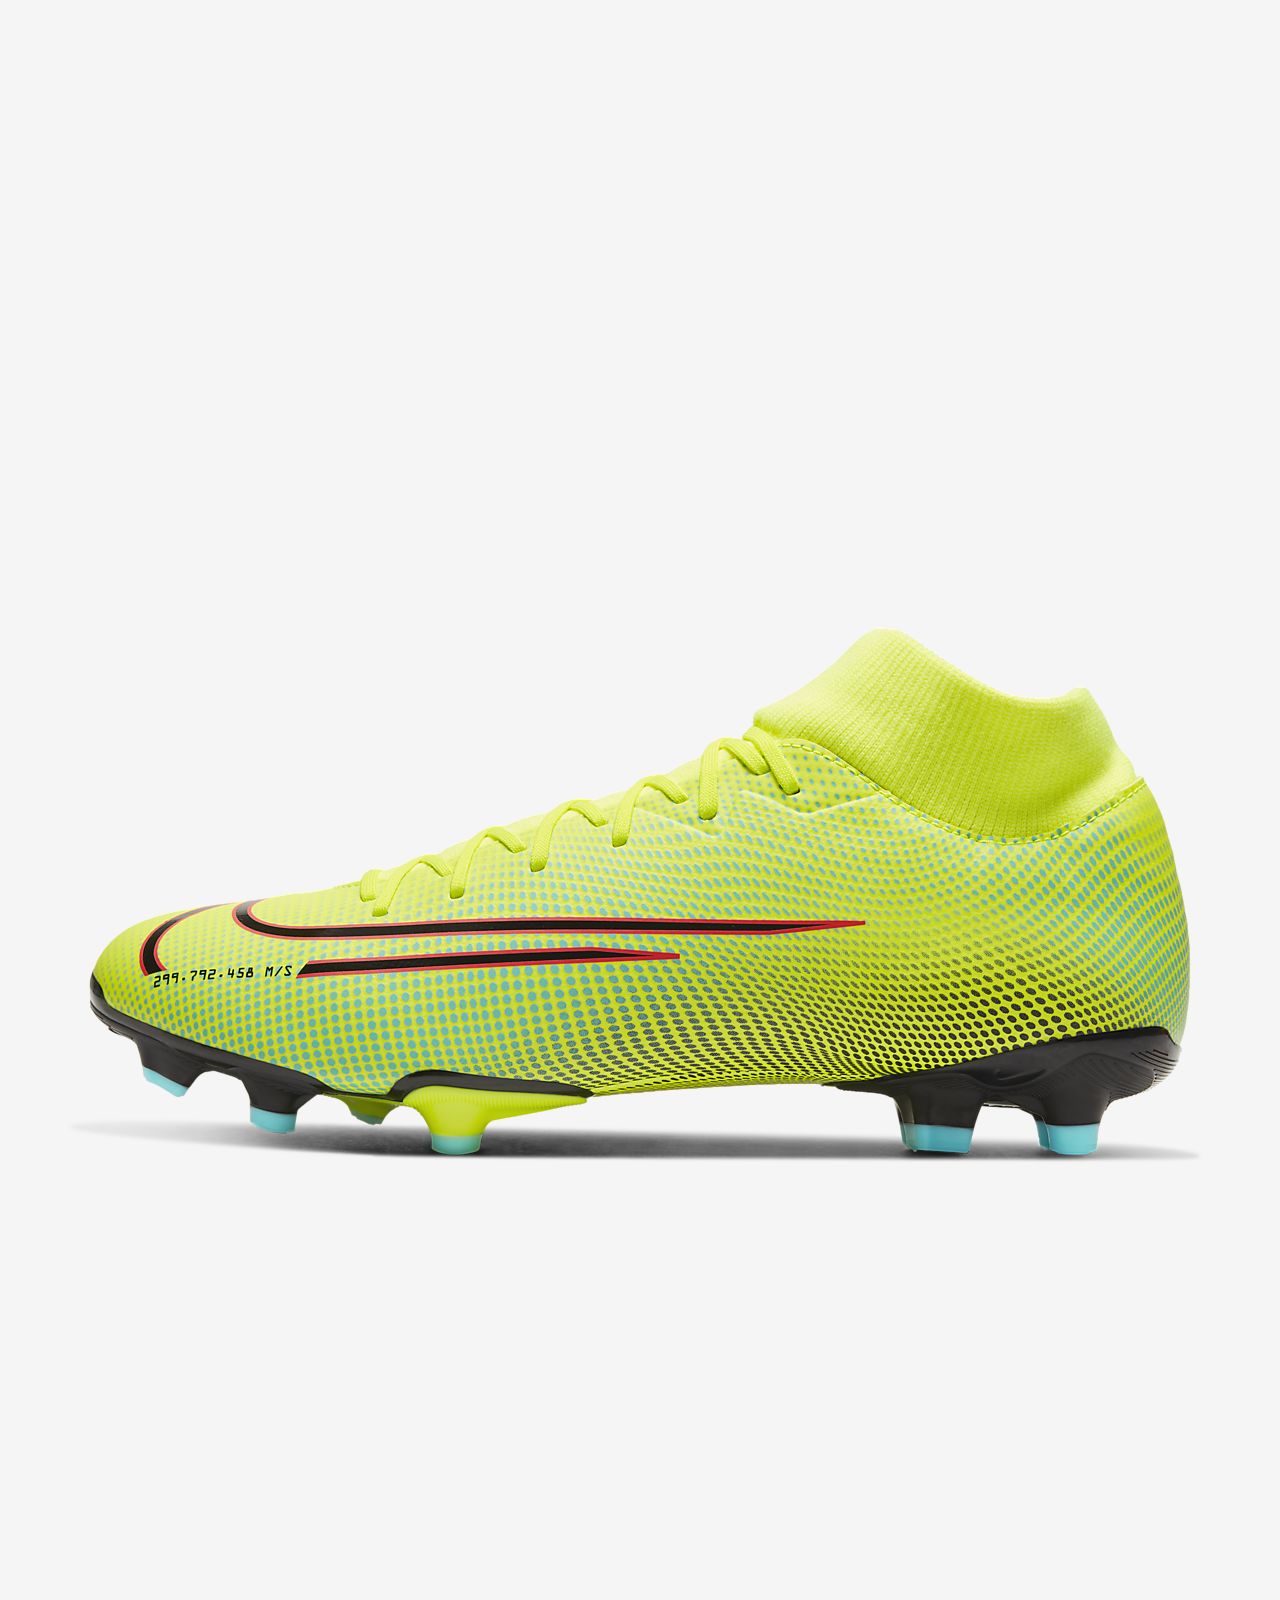 Men's boots Nike Mercurial Superfly 7 Academy MDS TF.